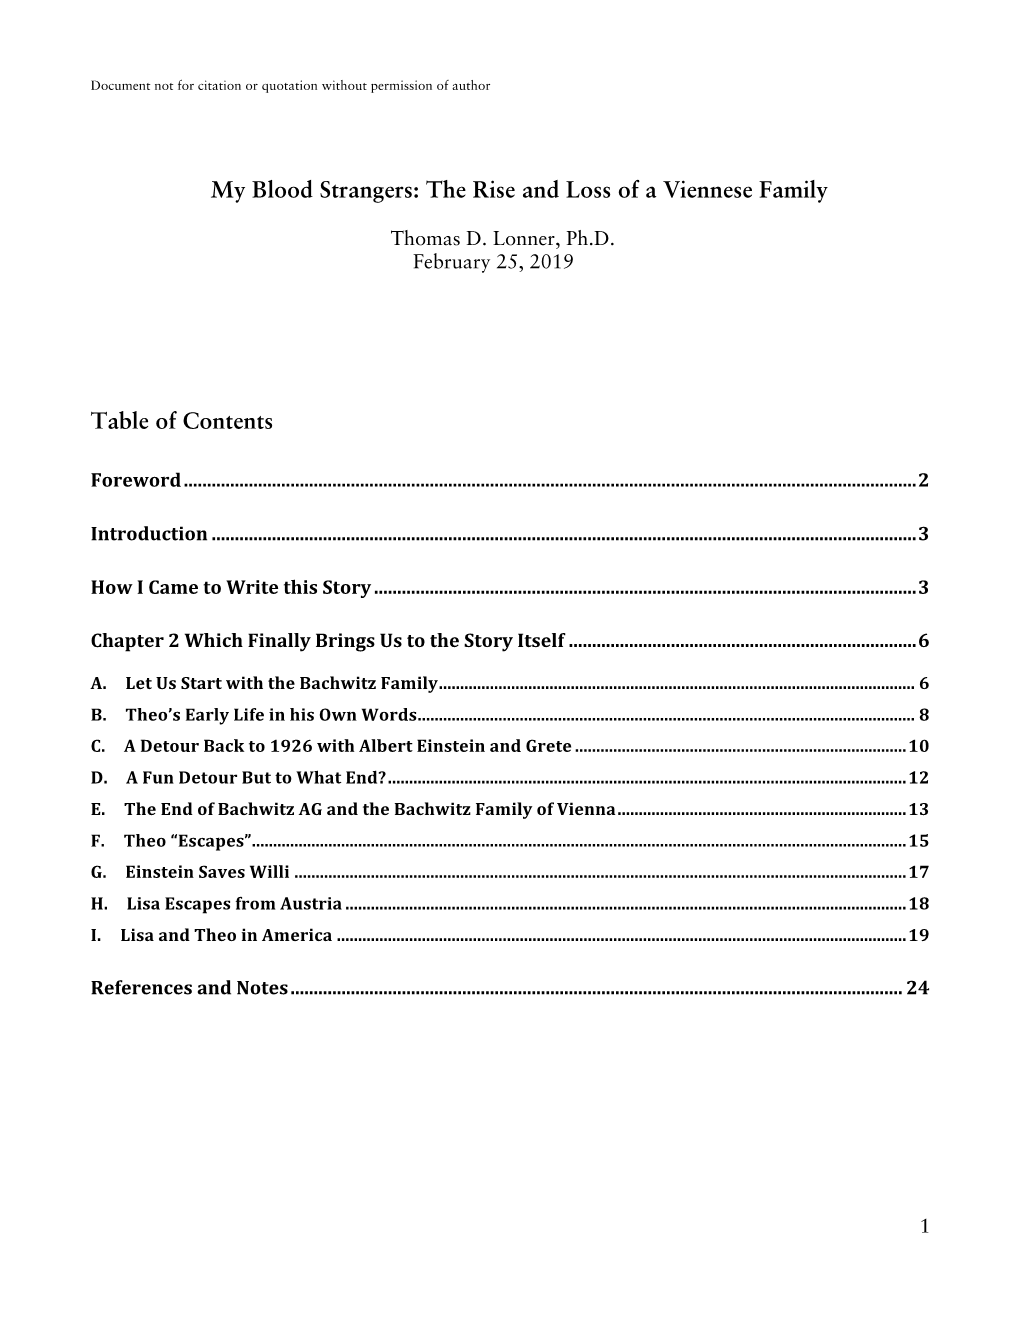 My Blood Strangers: the Rise and Loss of a Viennese Family Table Of